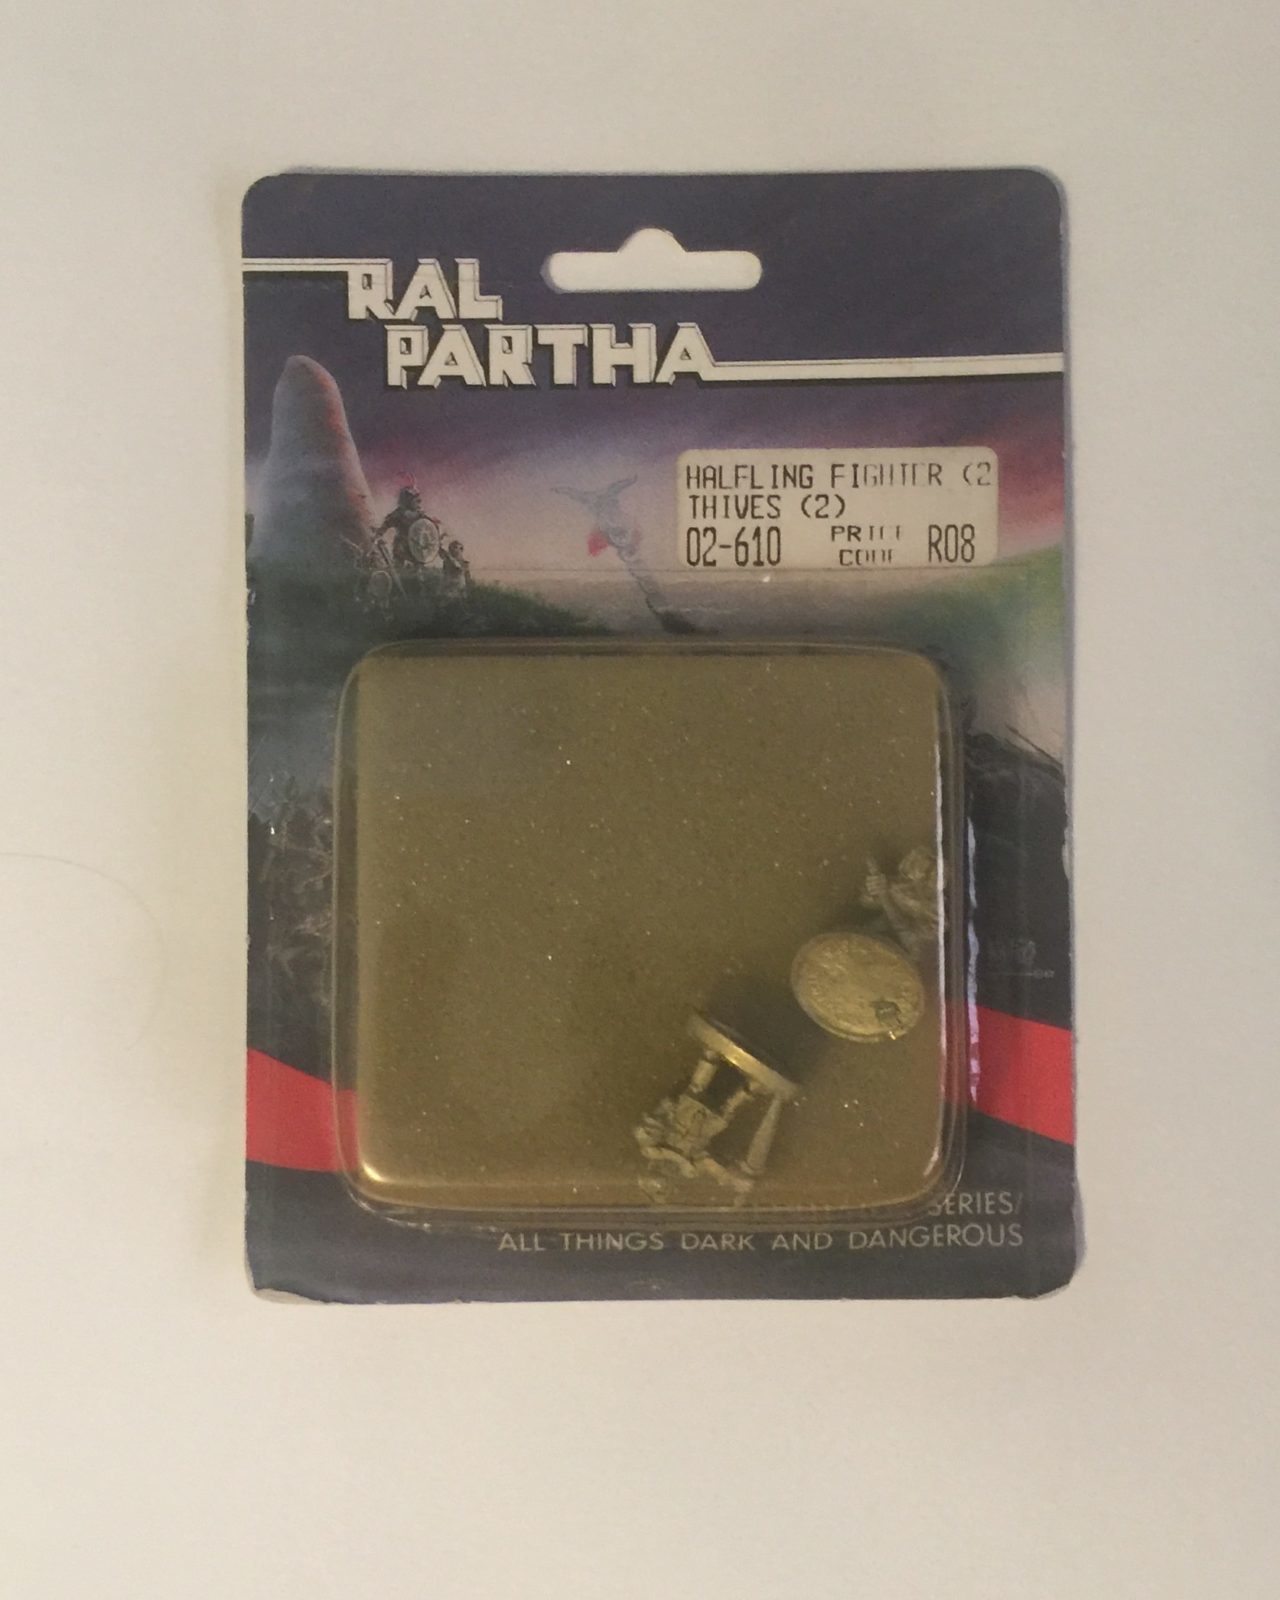 Ral Partha Halfling Fighter Thives